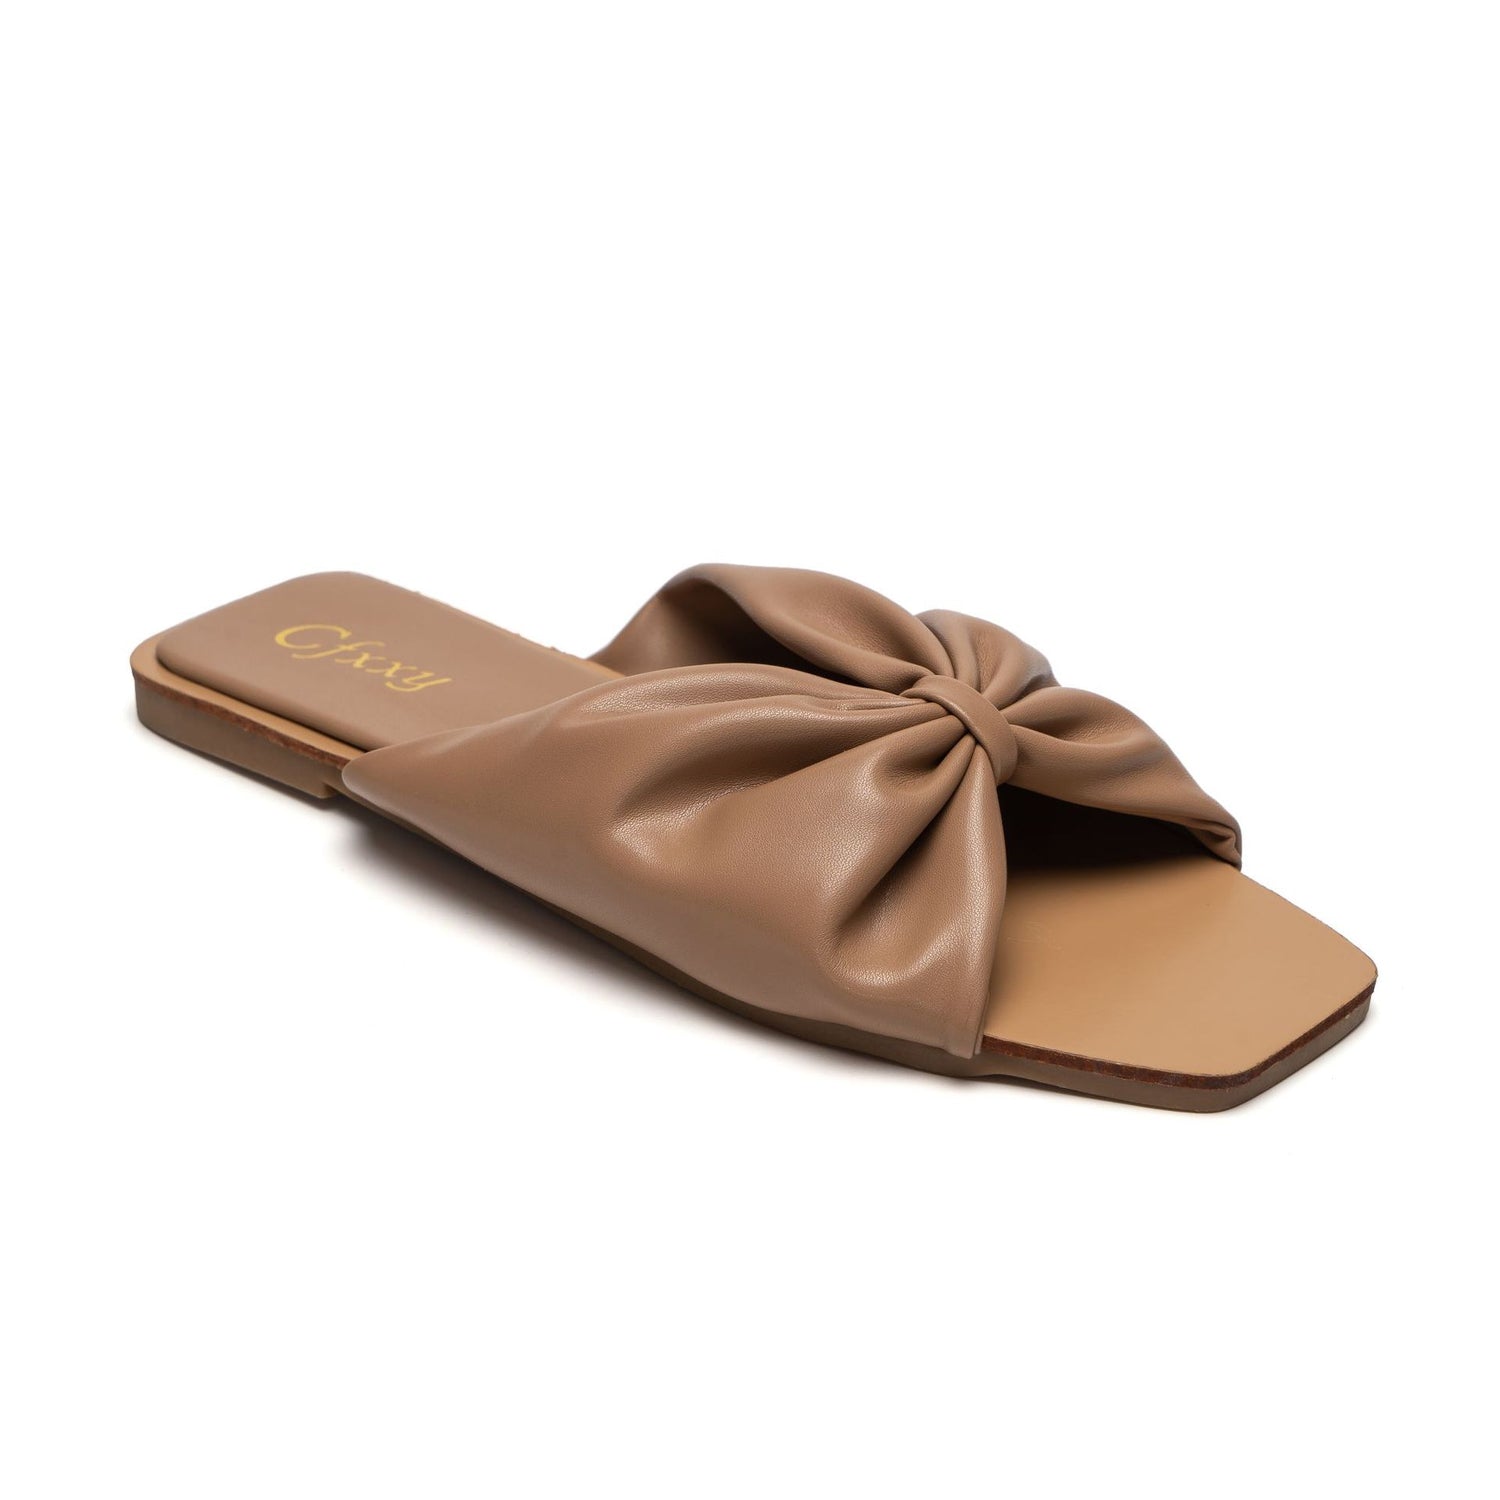 Large Size Square toe Bowknot Slippers  slippers Thecurvestory